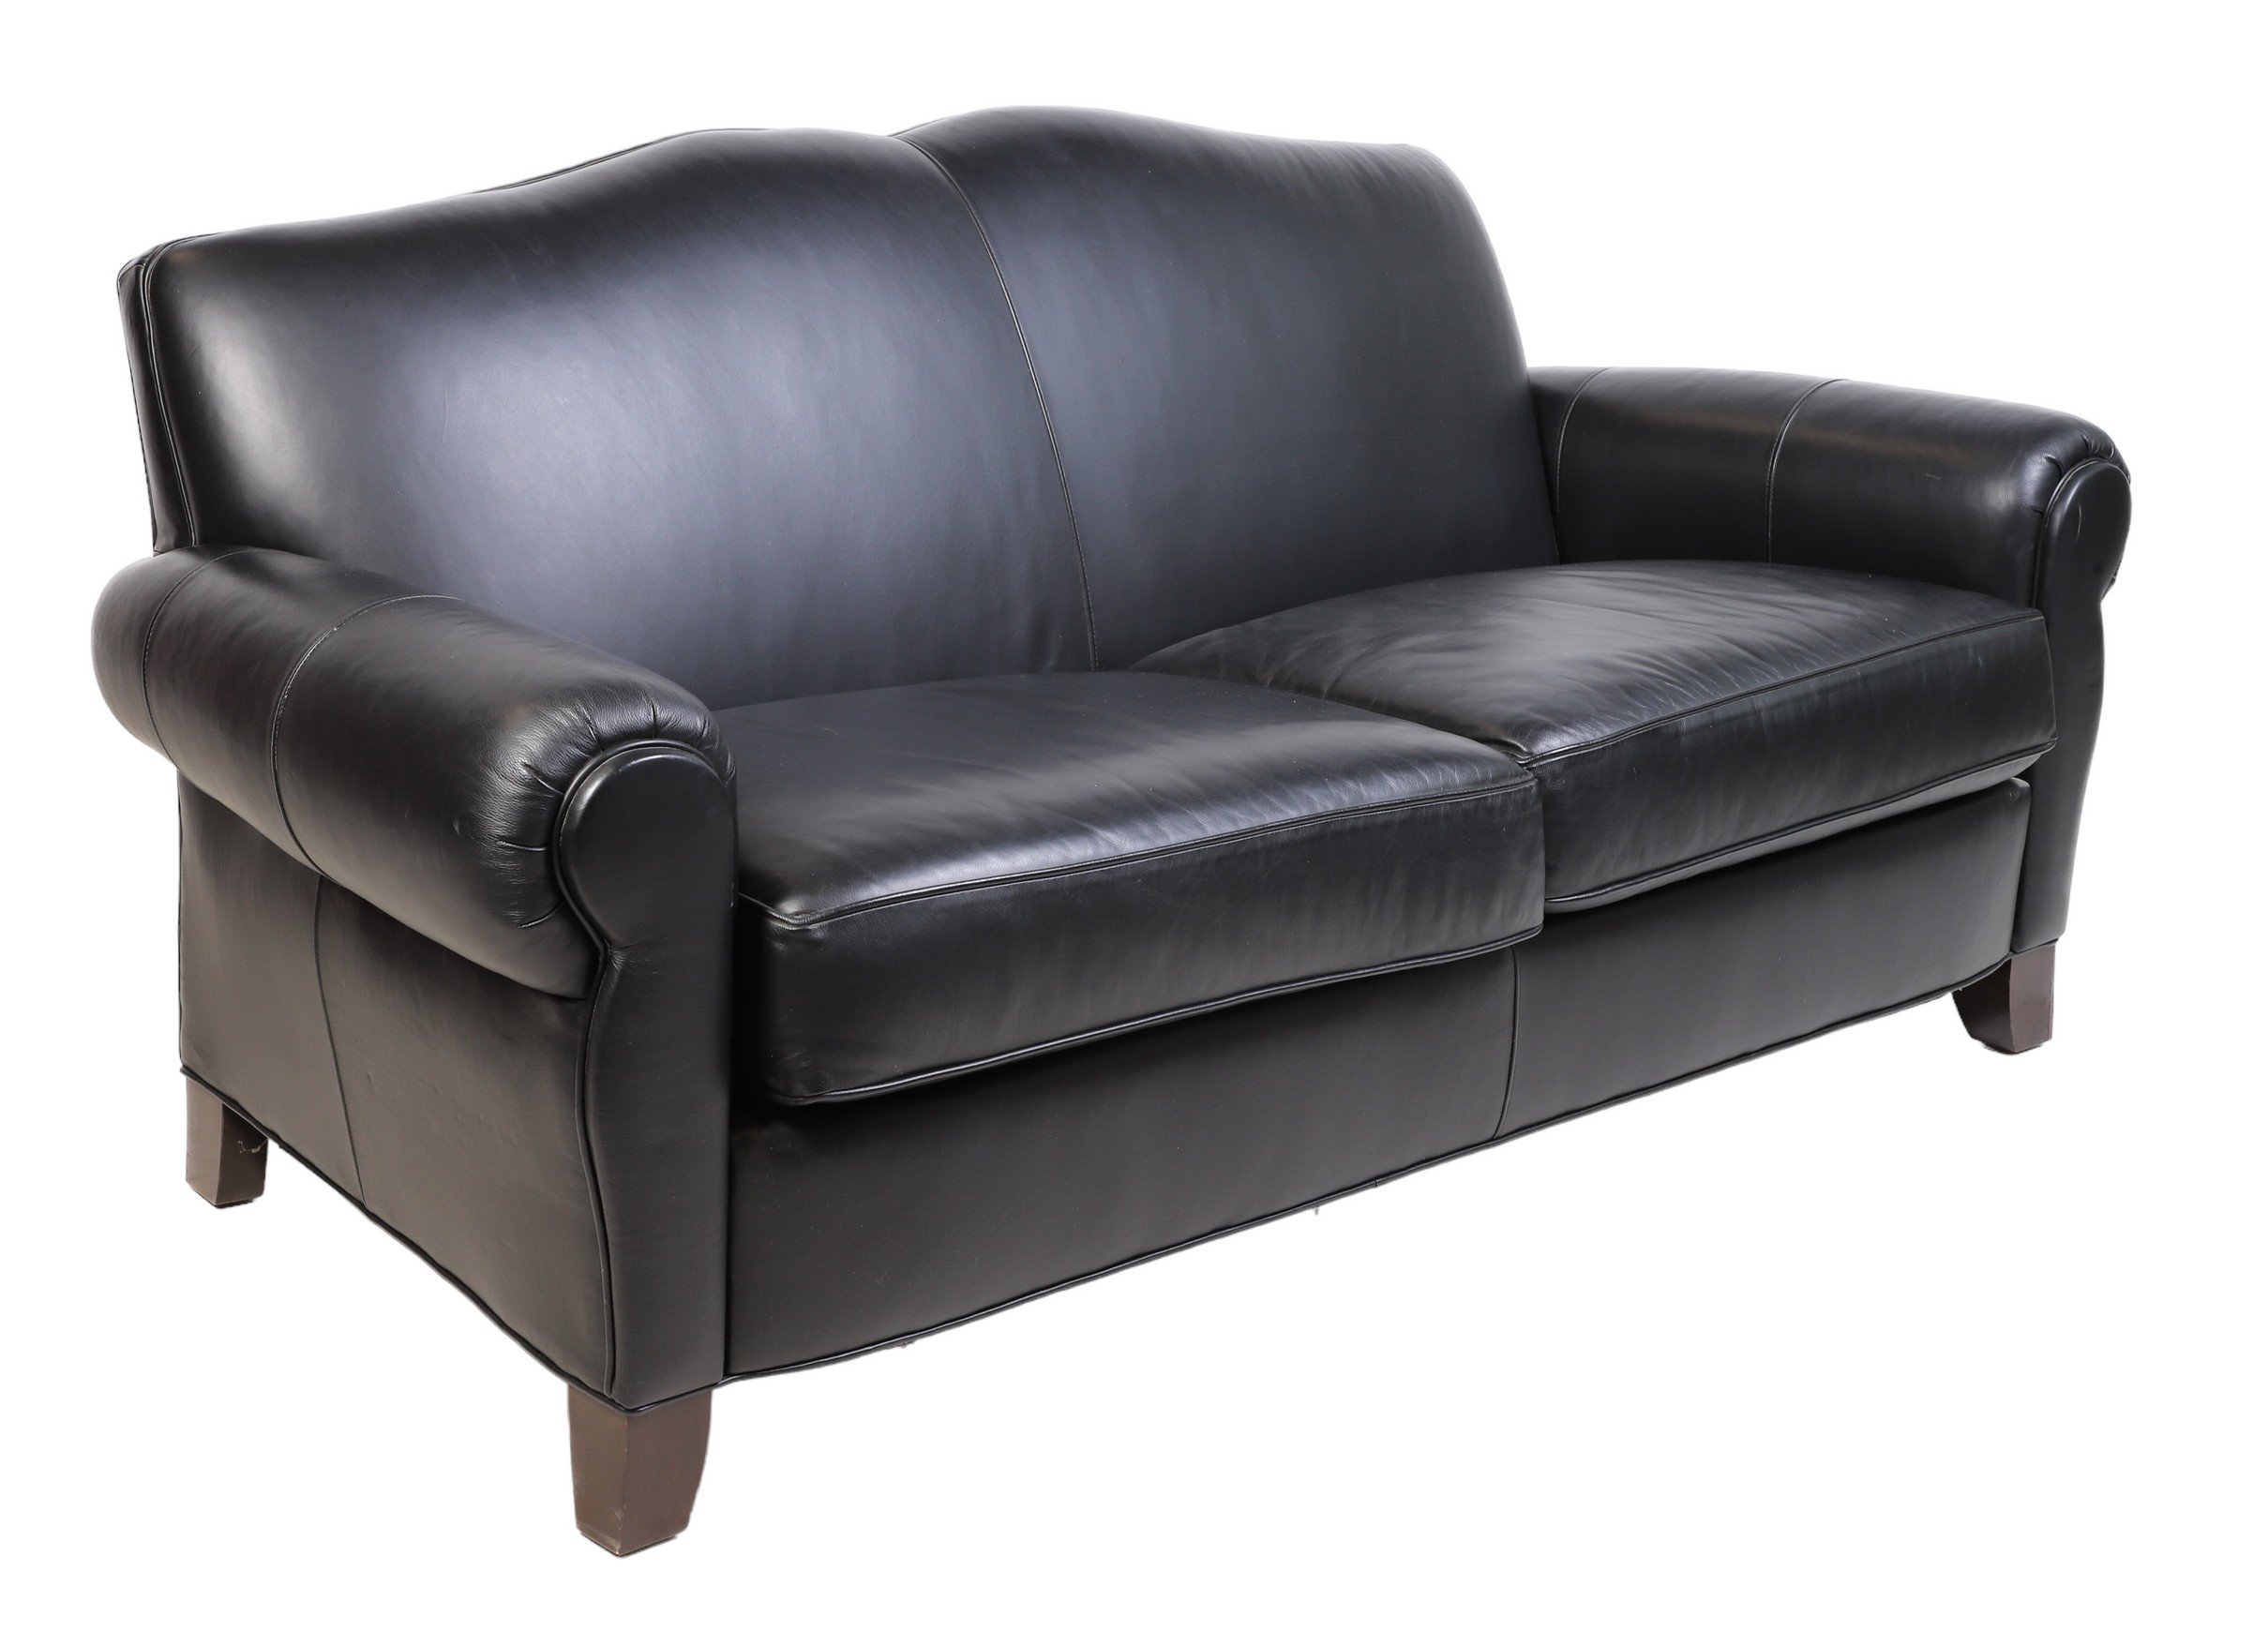 Ethan Allen Contemporary leather